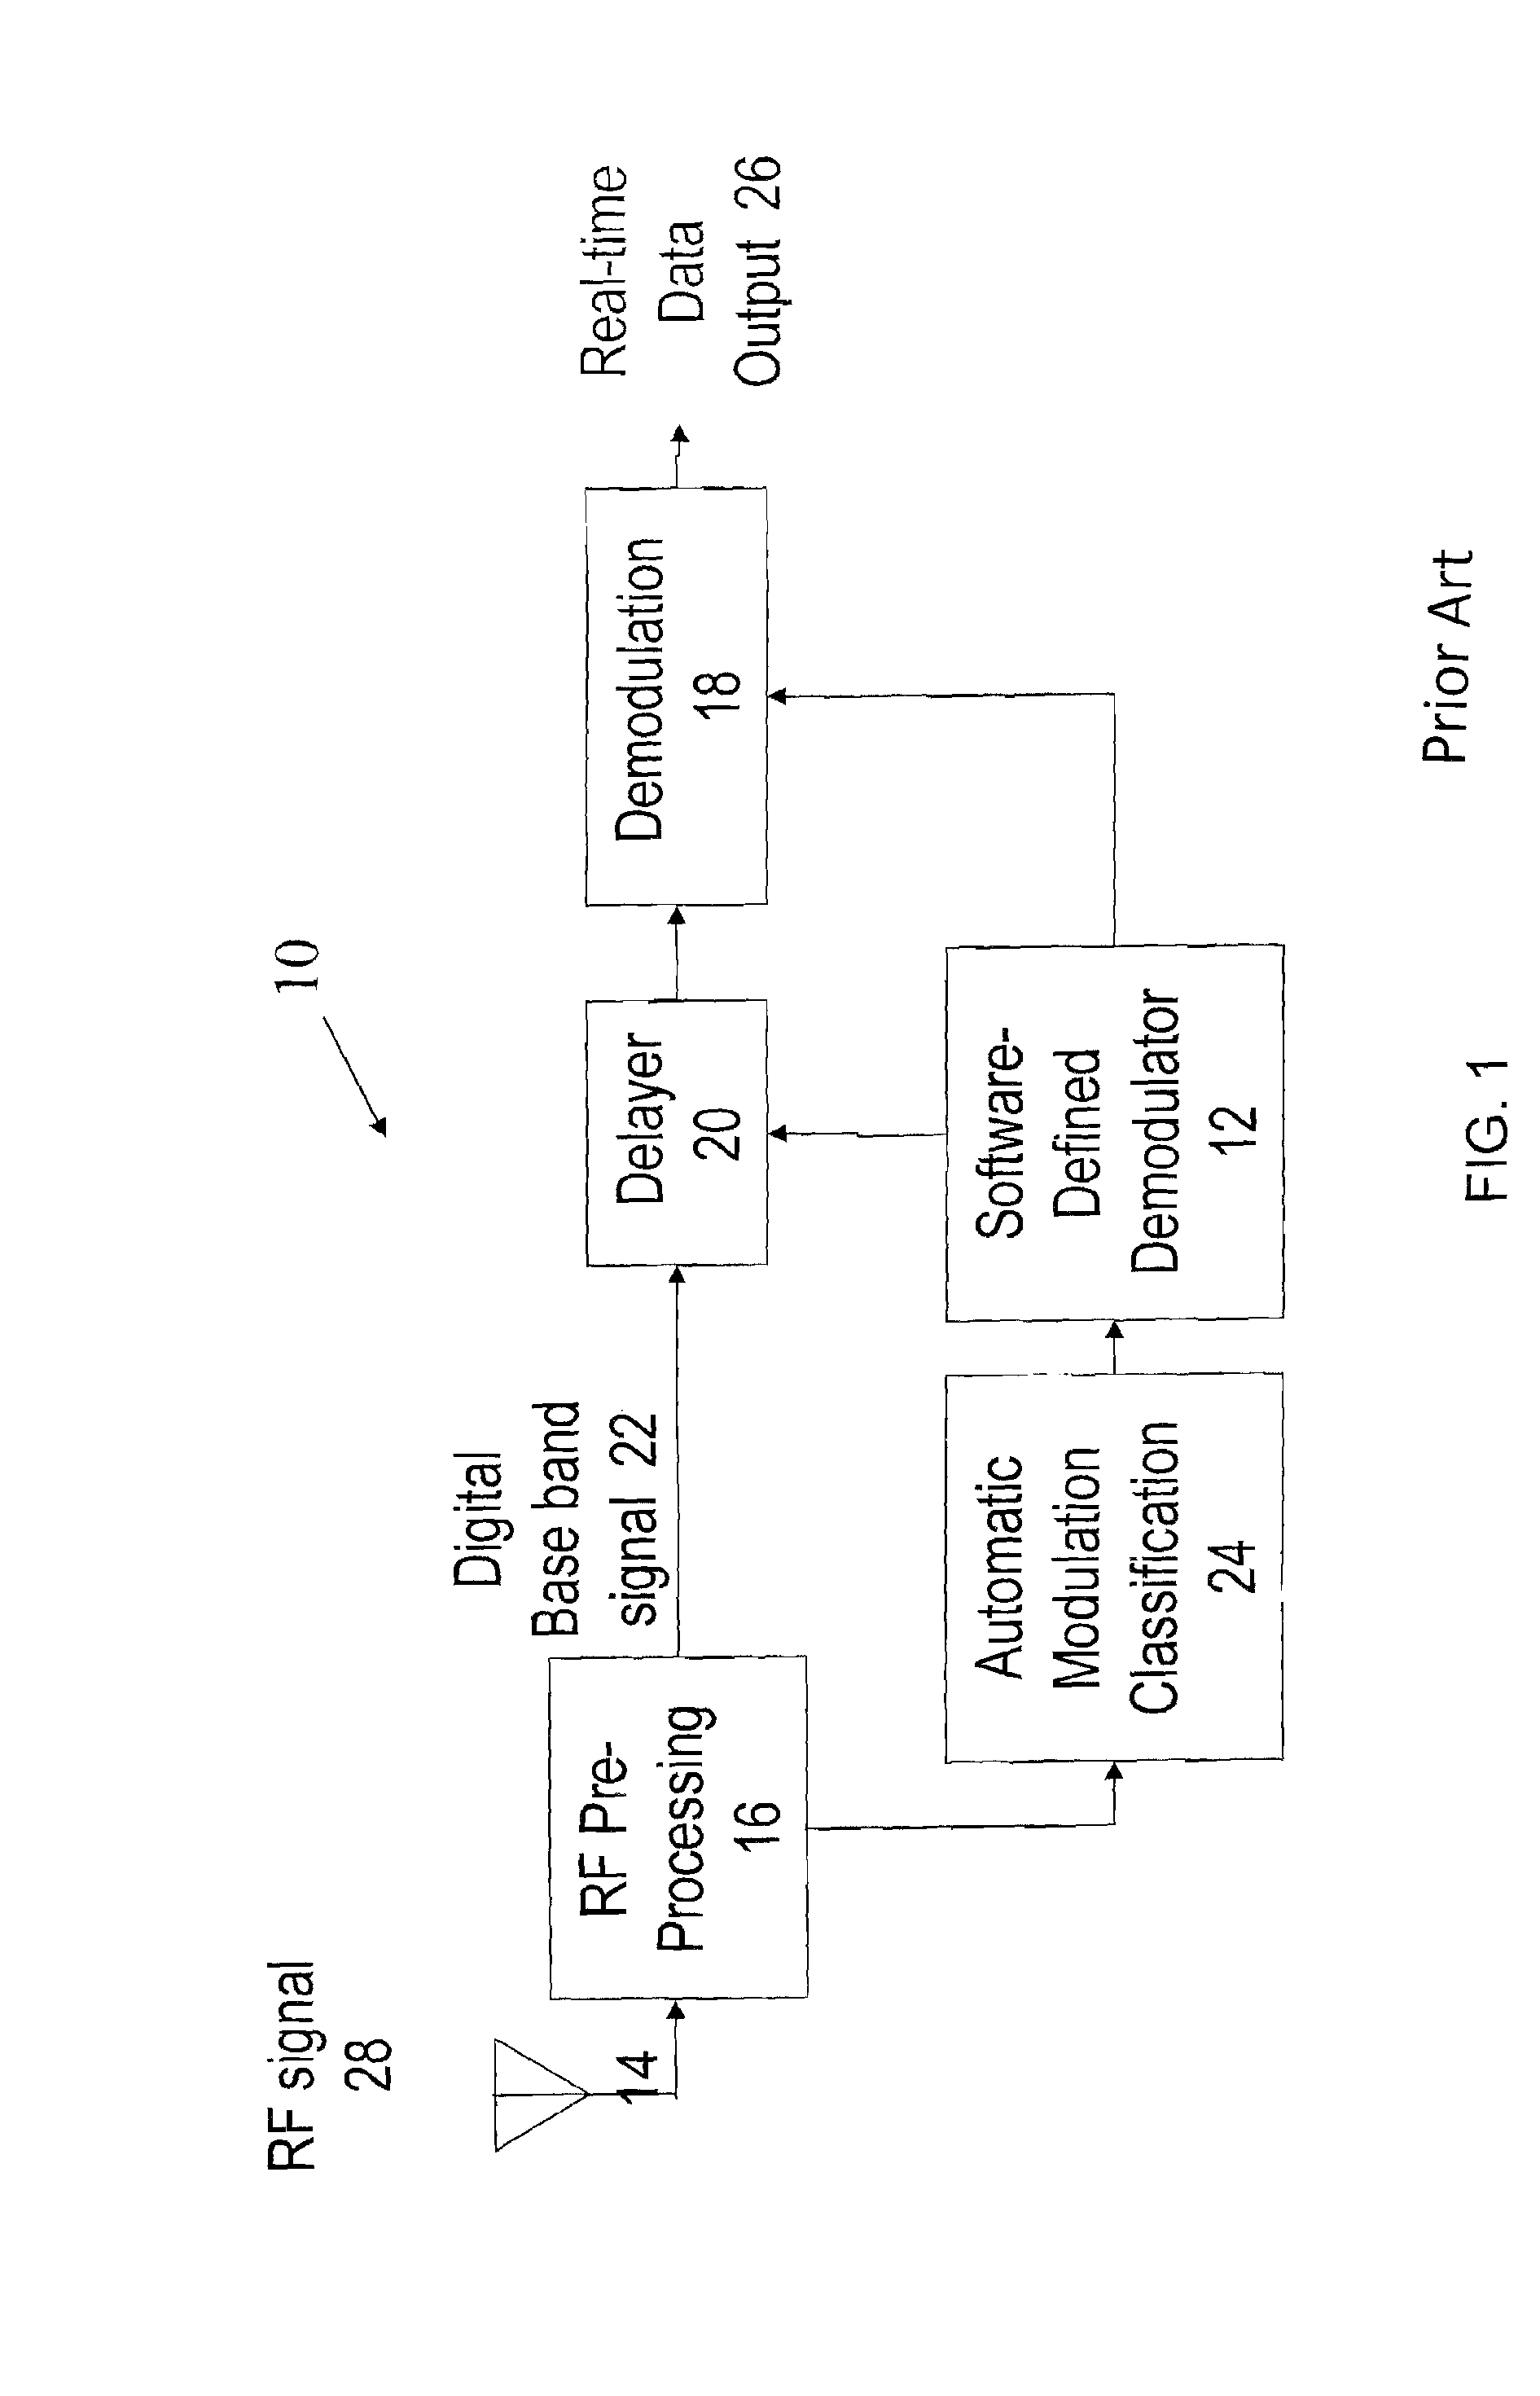 Asymptotically optimal modulation classification method for software defined radios